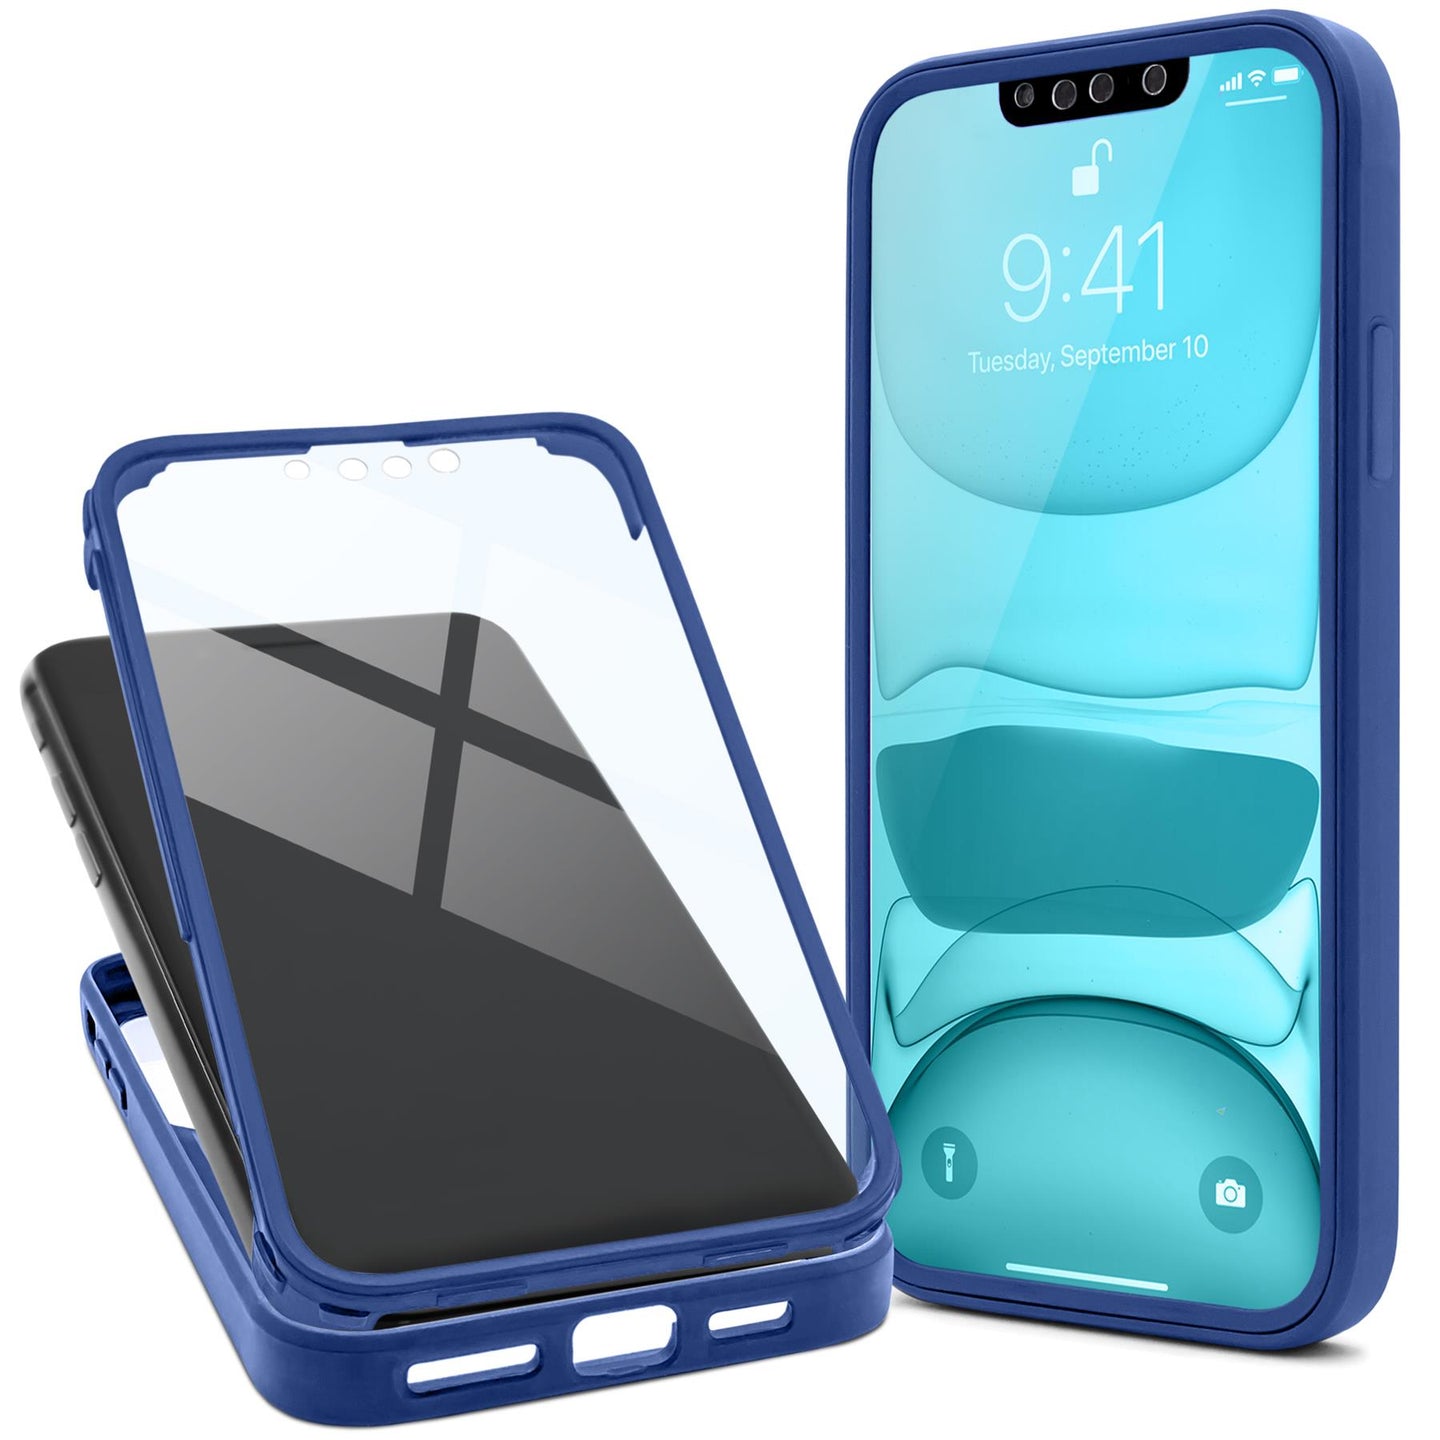 Moozy 360 Case for iPhone 13 Pro Max - Blue Rim Transparent Case, Full Body Double-sided Protection, Cover with Built-in Screen Protector